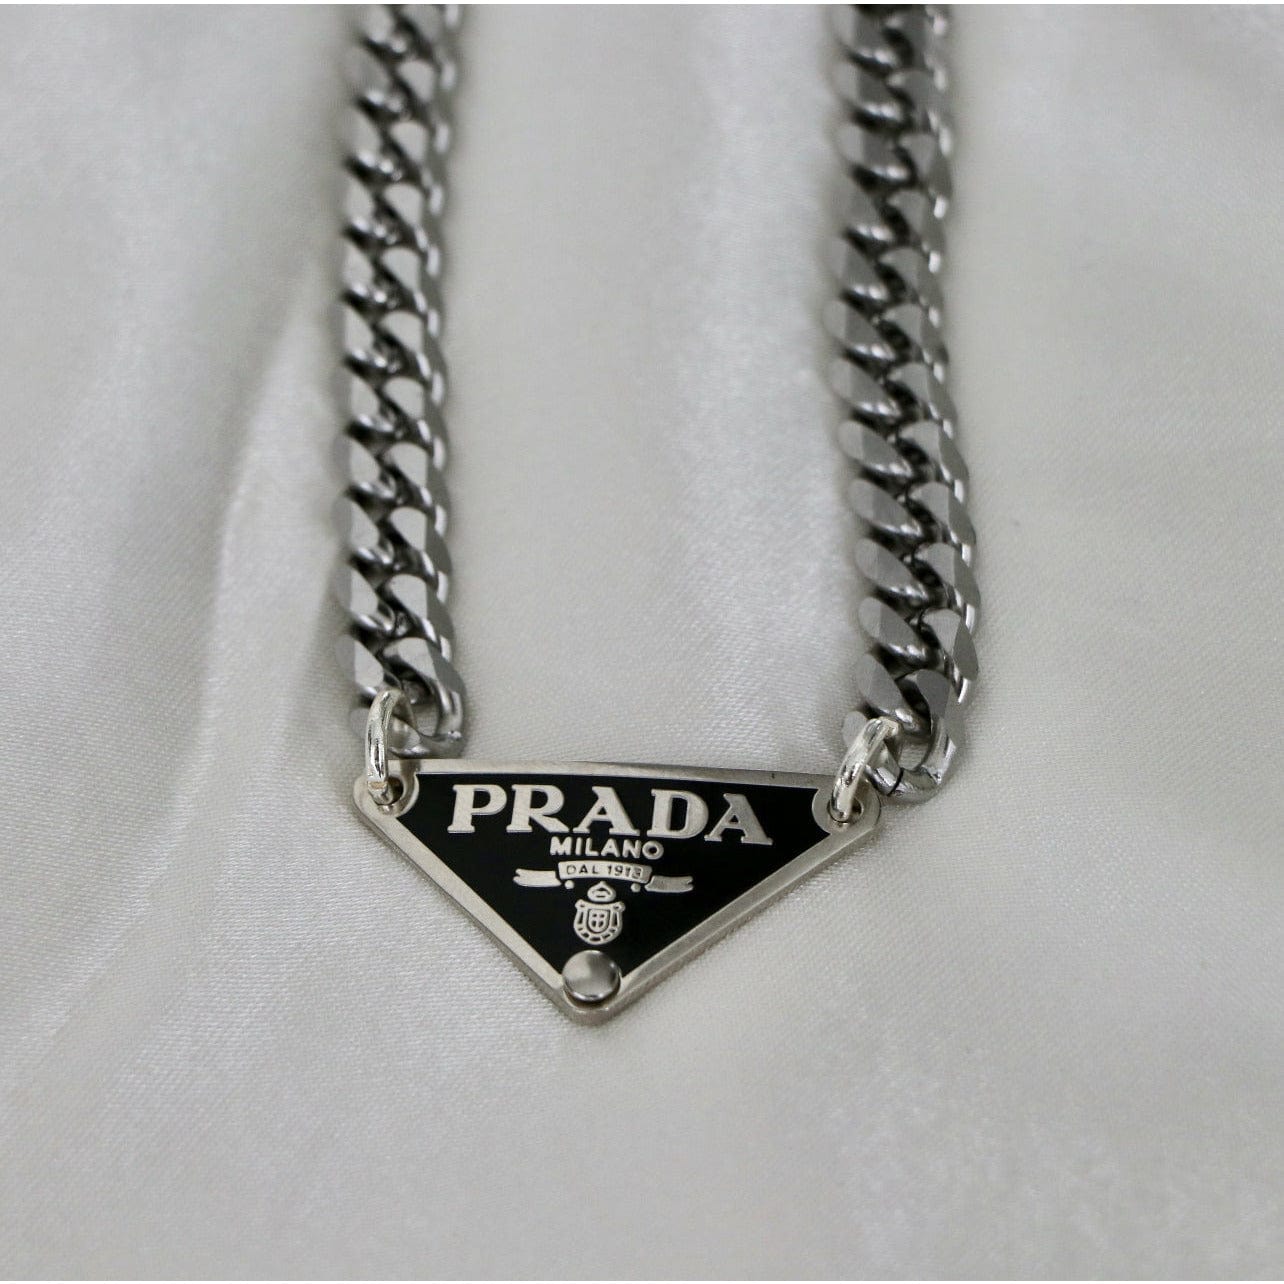 Prada Jewelry Collection  Shop New Prada Necklace Arrivals – Reluxe Vintage